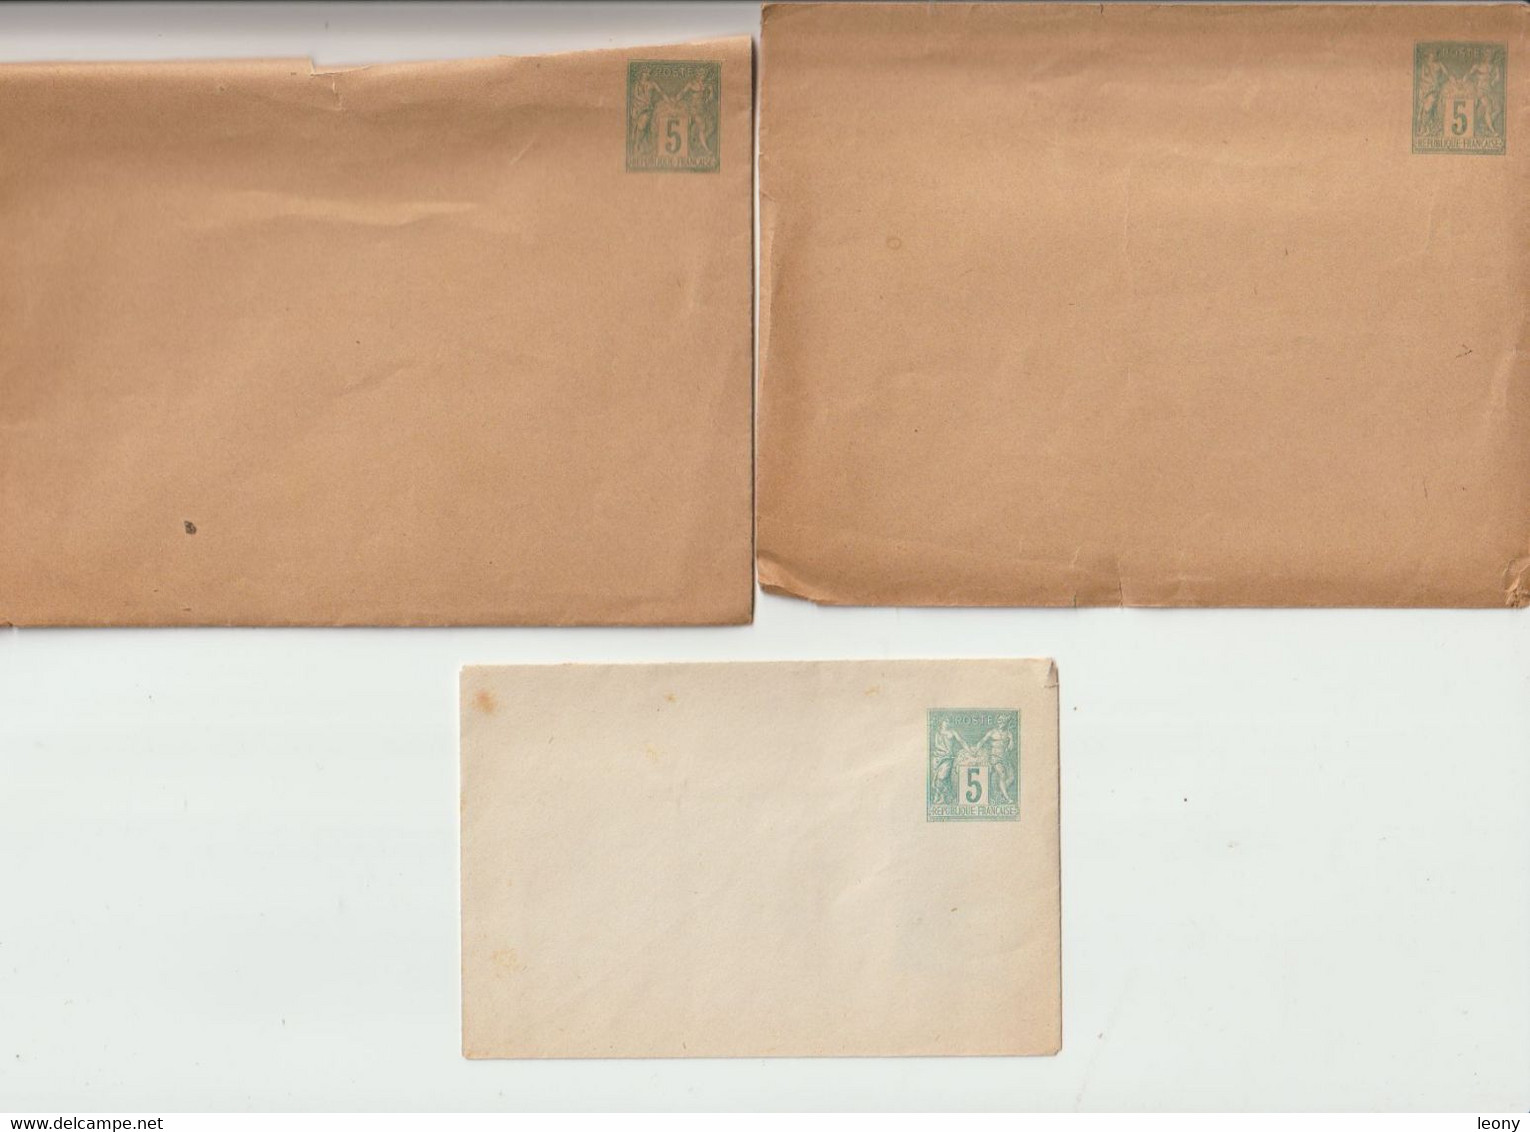 ENVELOPPES  " ENTIERS POSTAUX De FRANCE - NEUFS " - Overprinted Covers (before 1995)